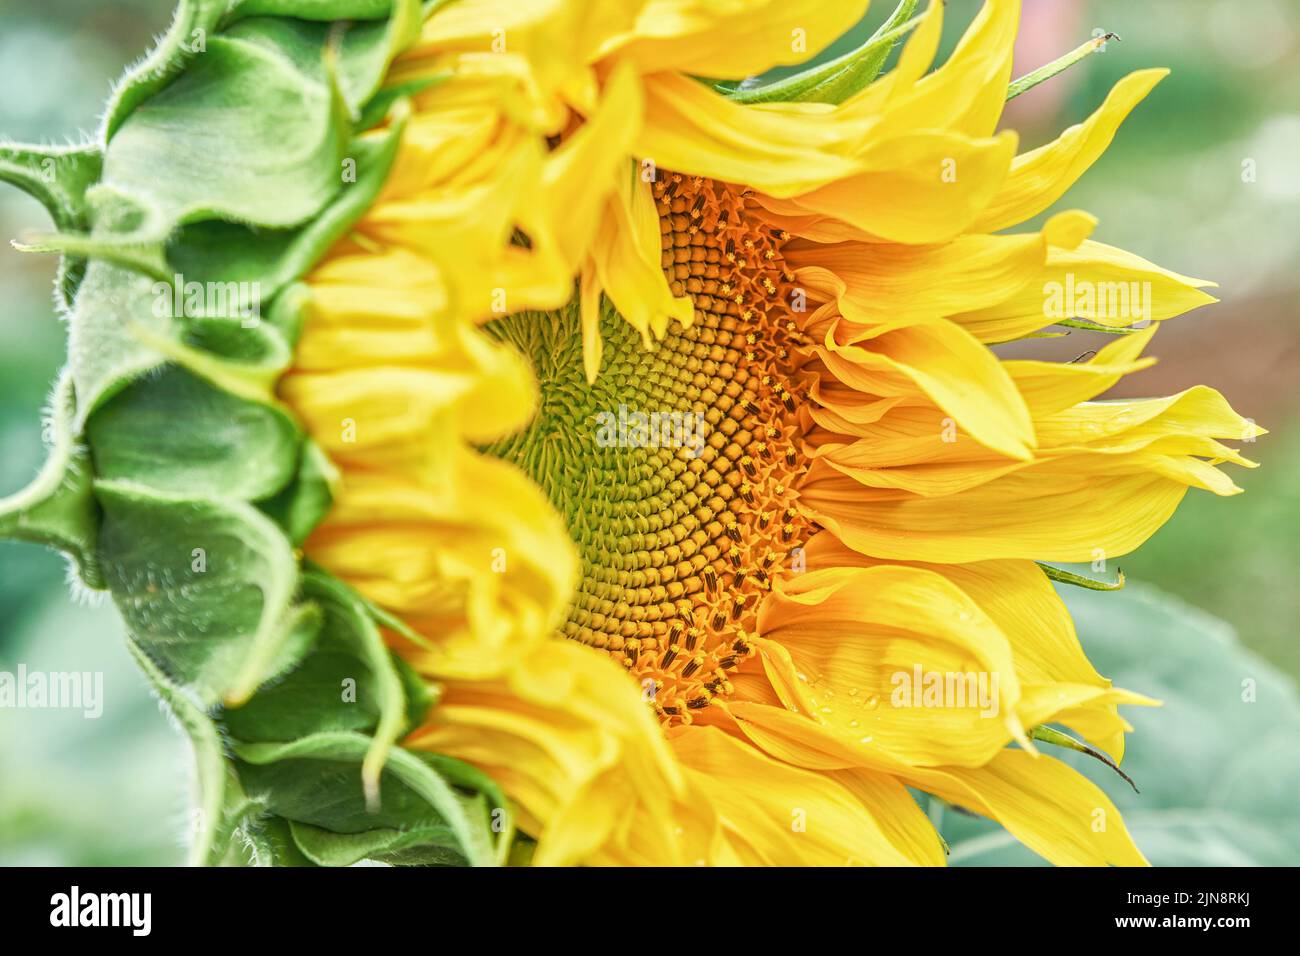 Sunflower with bright yellow petals disk floret and green leaves on blurred background. Beautiful plant grows in agricultural field extreme closeup Stock Photo